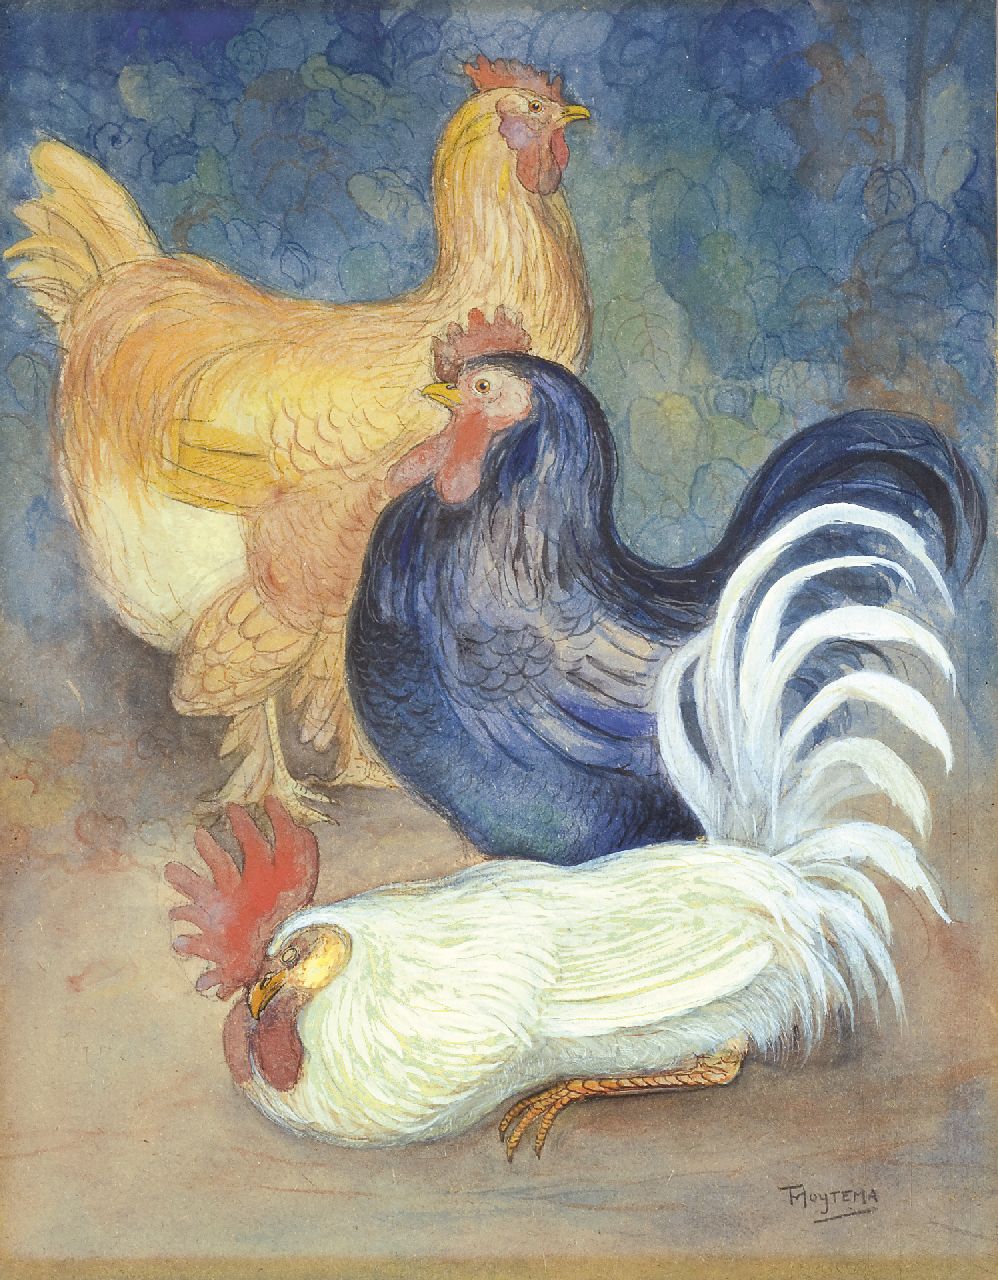 Hoytema Th. van | Theodorus 'Theo' van Hoytema, Hens and Rooster, chalk and gouache on cardboard 49.7 x 38.7 cm, signed l.r. and executed circa 1898